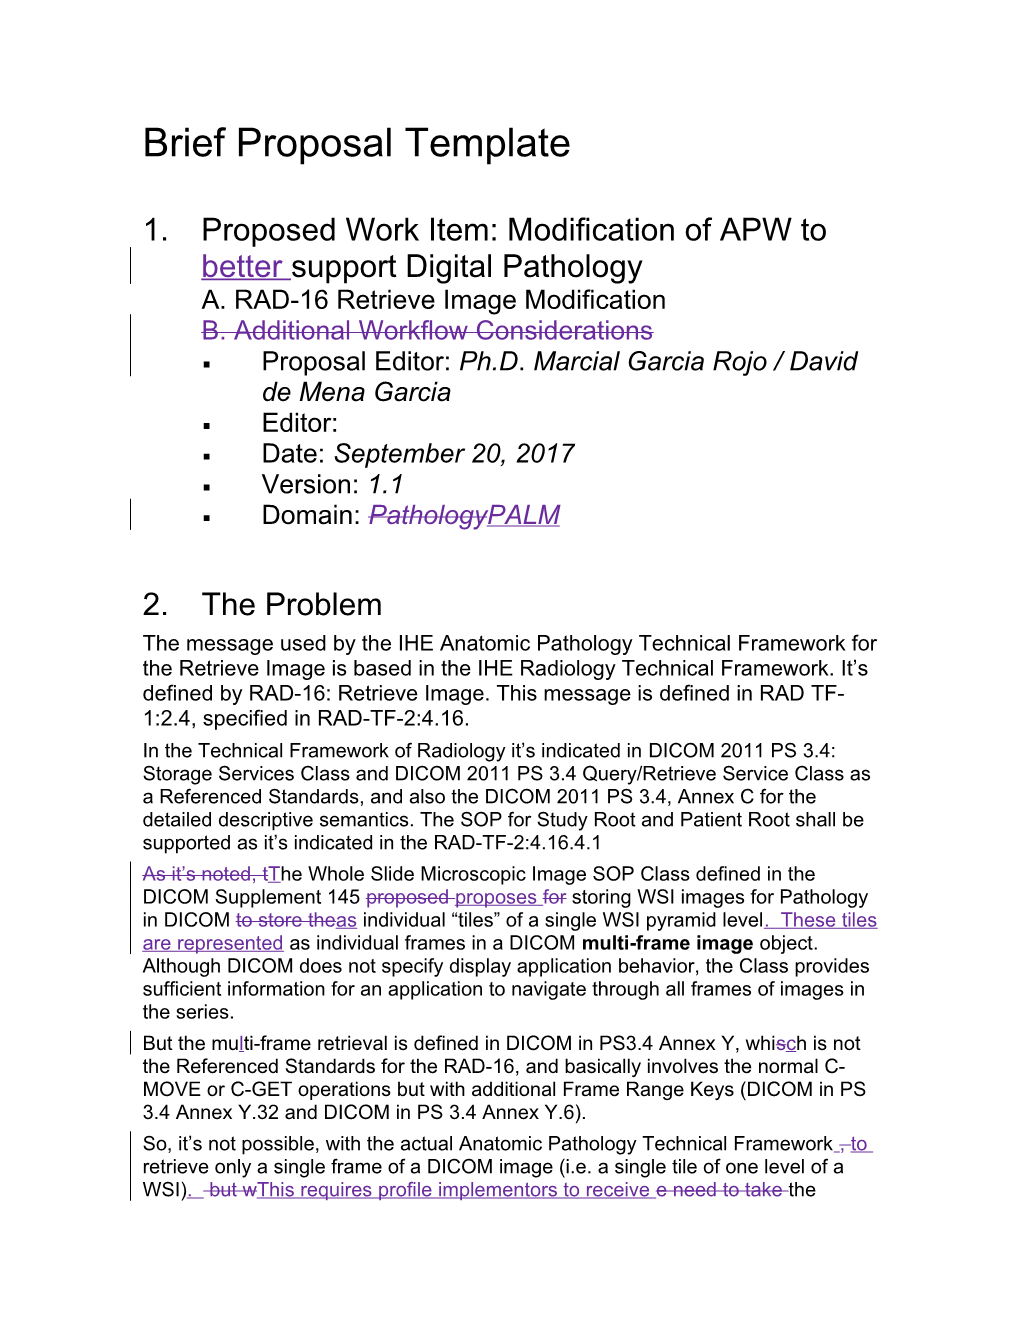 1.Proposed Work Item: Modification of APW to Better Support Digital Pathology